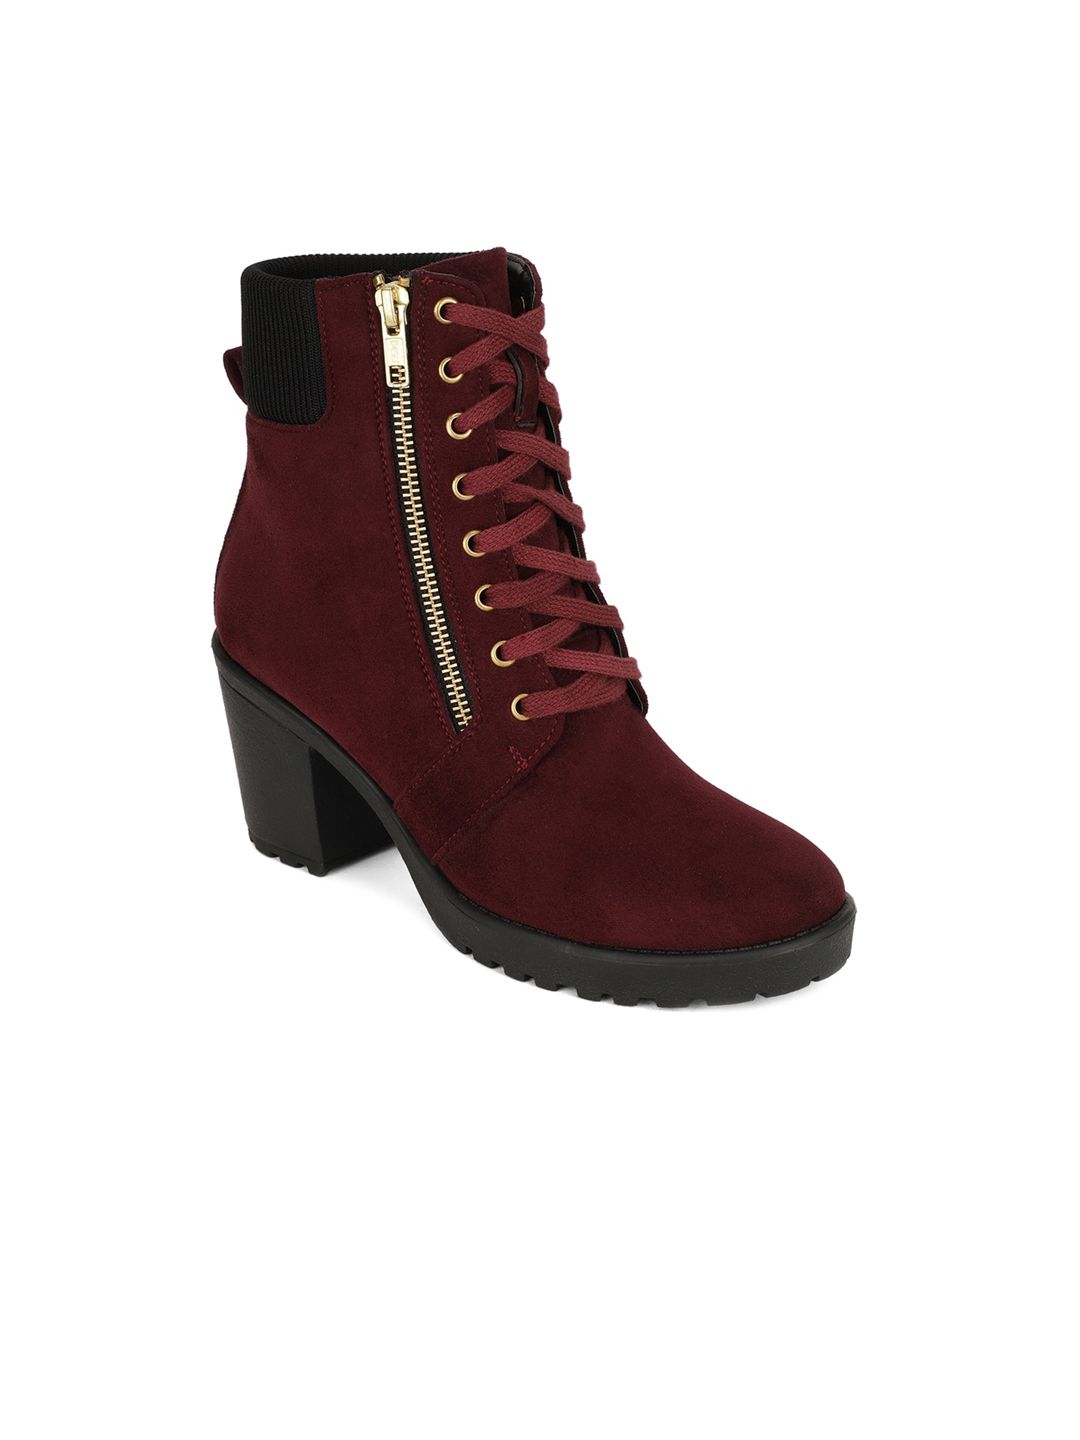 Bruno Manetti Maroon Suede Block Heeled Boots Price in India